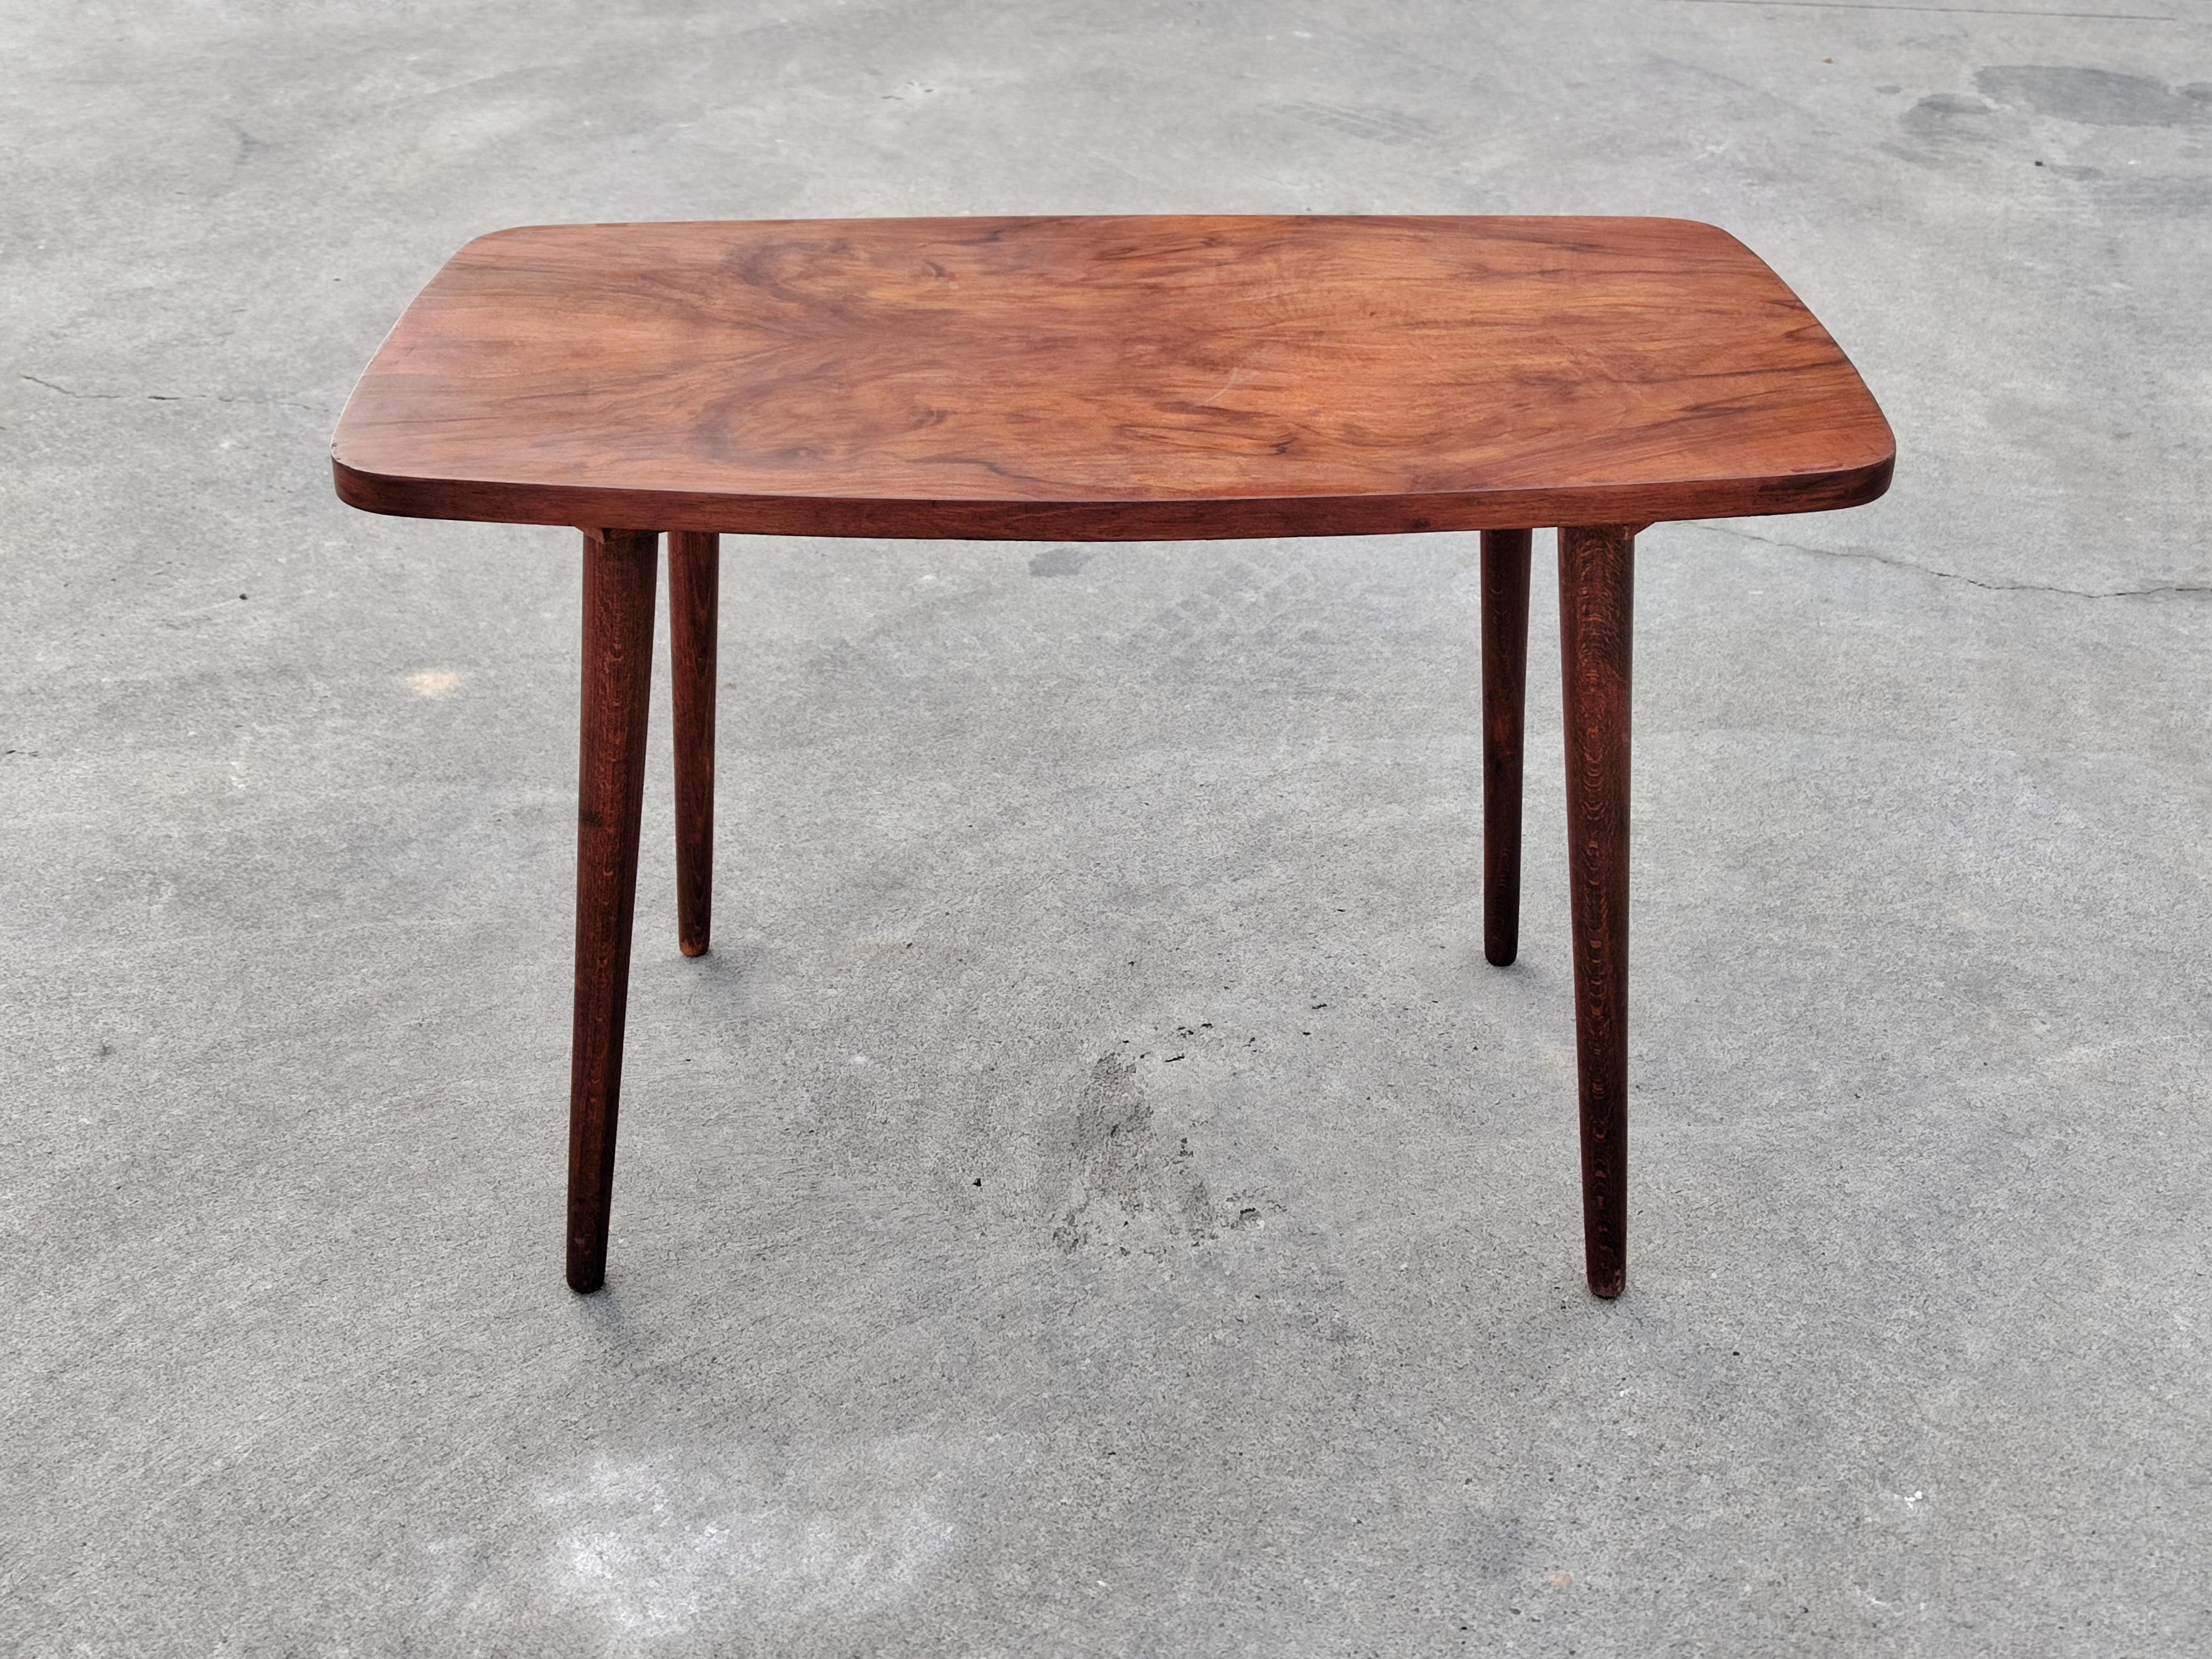 Small Mid-Century Modern Side Table with Walnut Veneer Top, Denmark 1960s For Sale 1